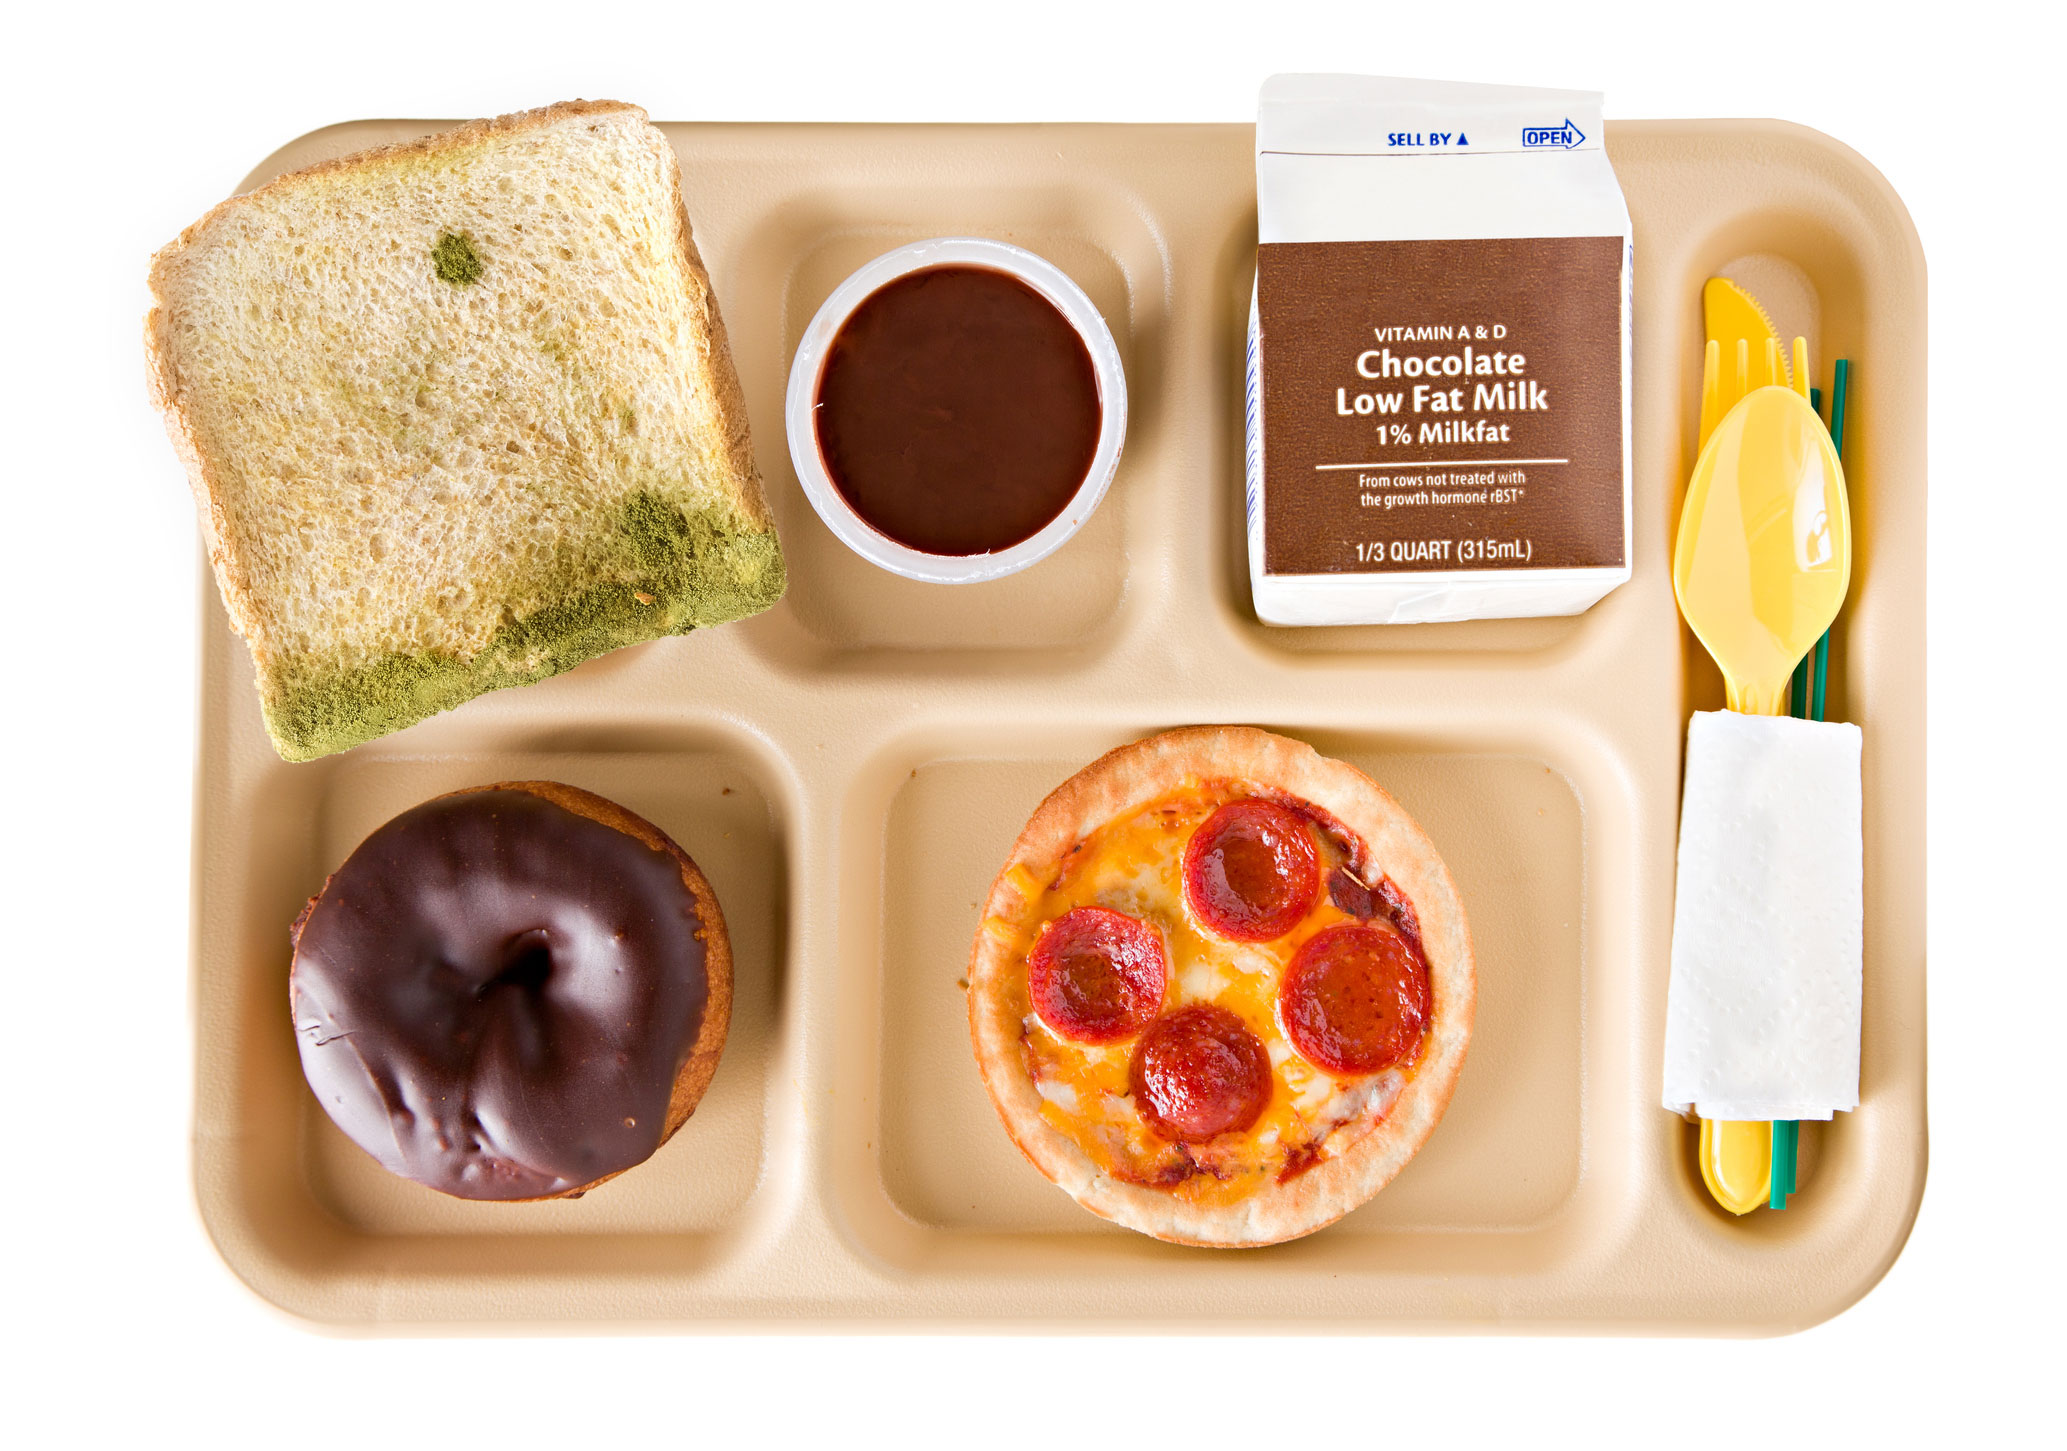 https://food-contact-surfaces.com/wp-content/uploads/2019/01/unhealthy_school_lunch_tray.jpg